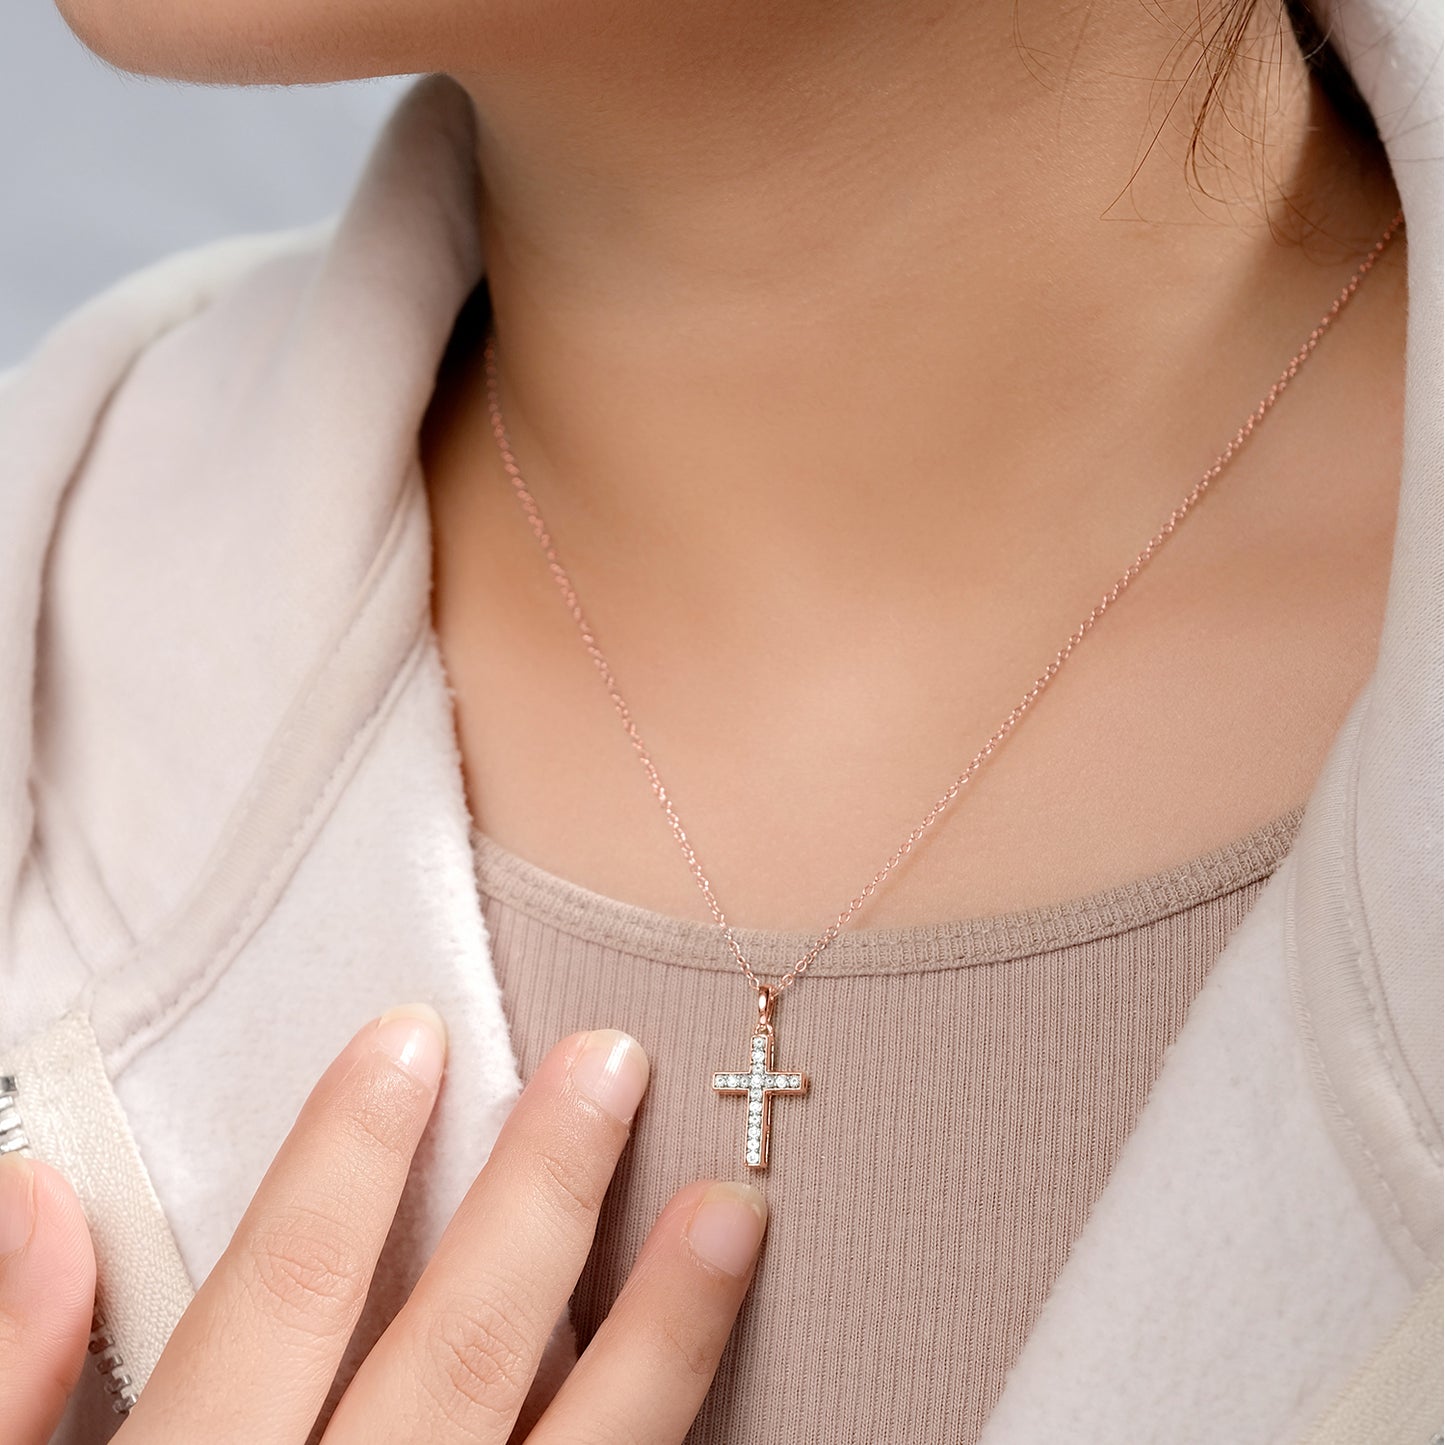 Diamond Studded Cross Pendant Necklace in 925 Sterling Silver